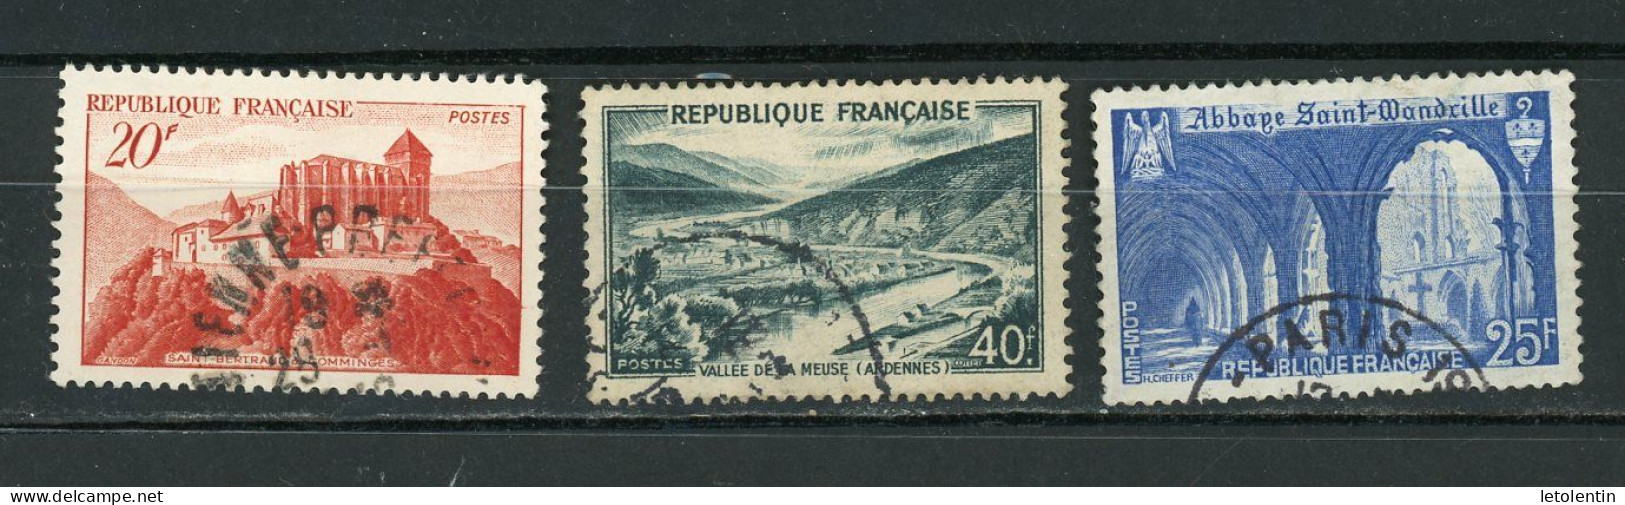 FRANCE - SITES -   N°Yvert 841A+842+842A Obli. - Used Stamps